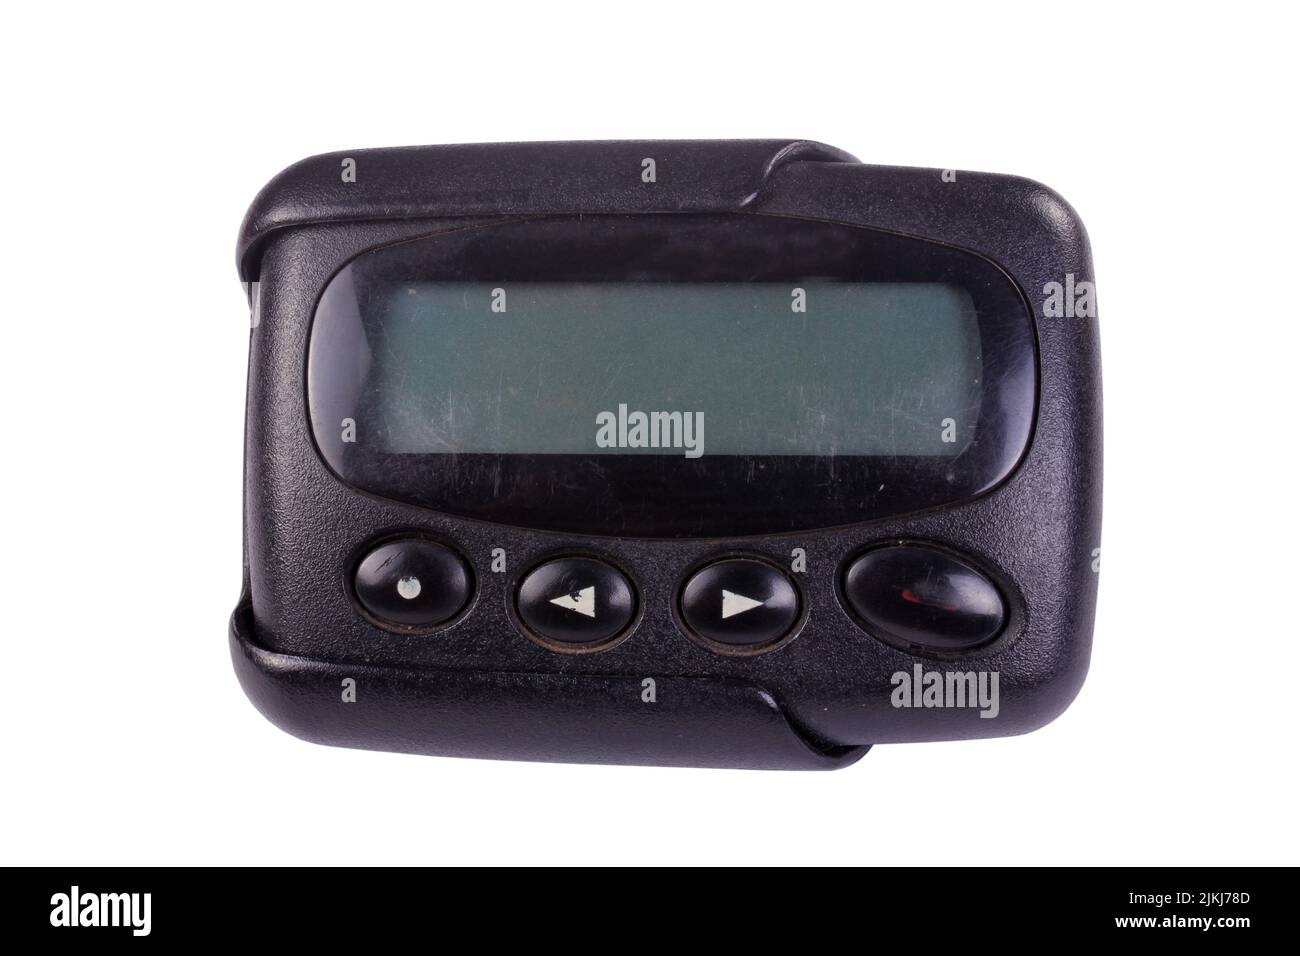 Old pager device isolate on white background Stock Photo